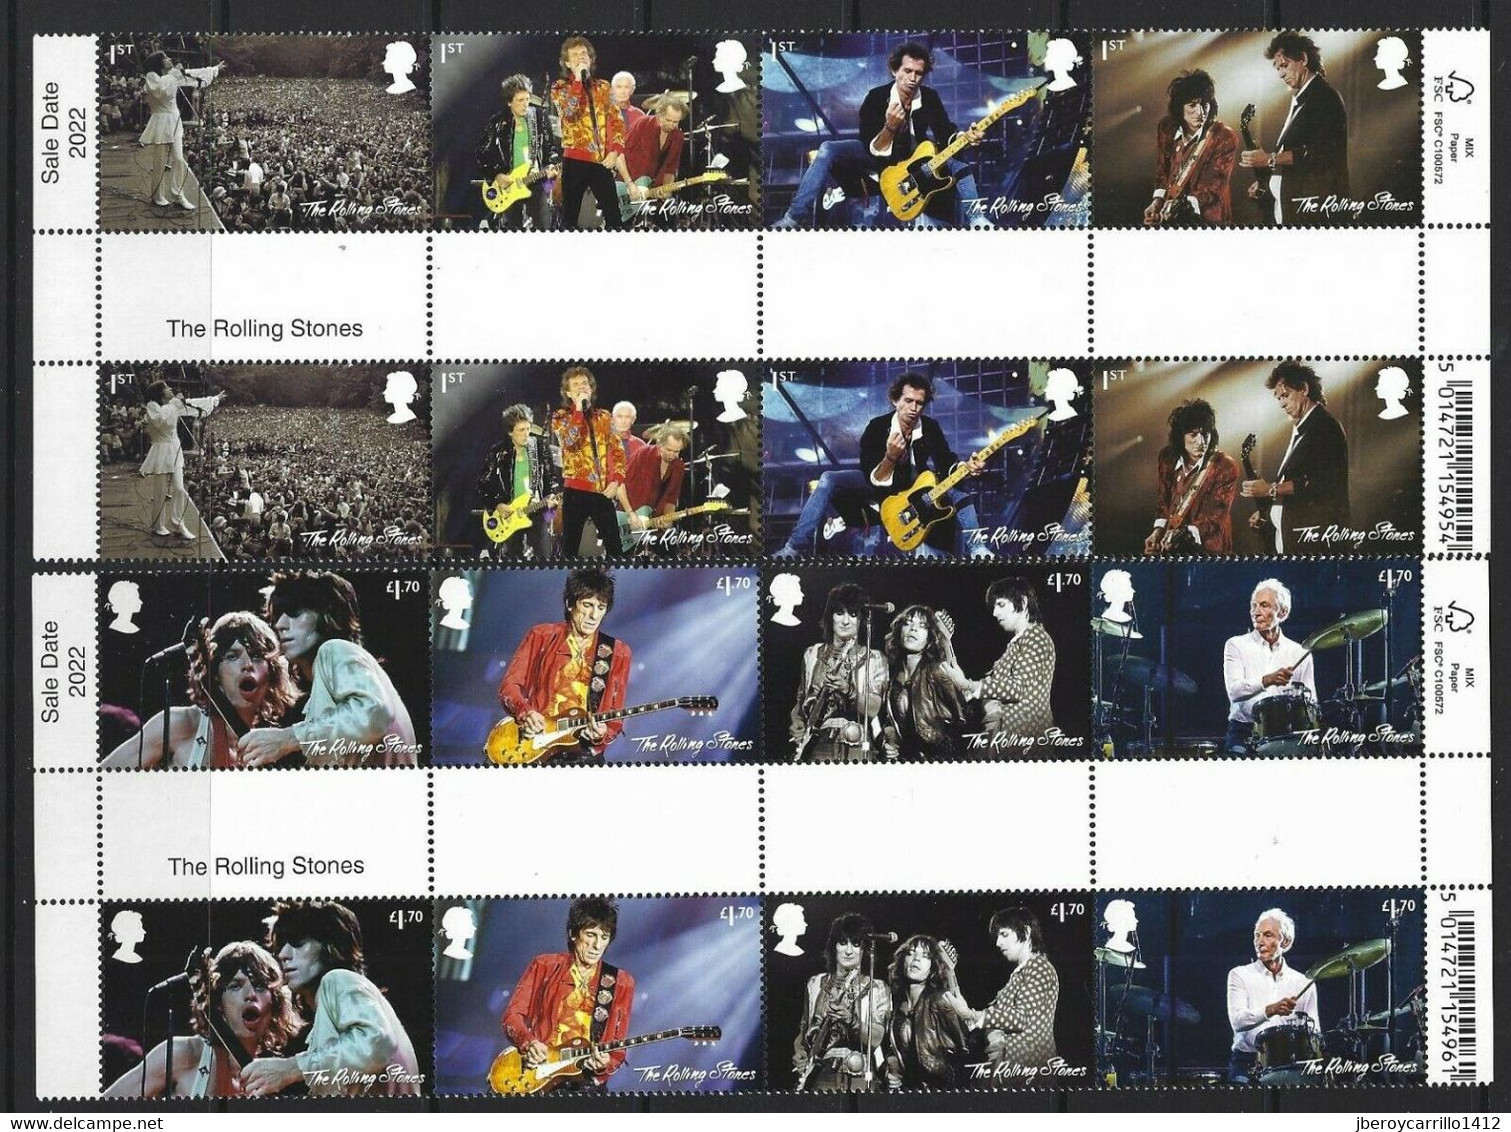 GREAT BRITAIN / GRAN BRETAÑA - 2022- MUSIC GIANTS VI-THE ROLLING STONES- 60 YEARS OF HISTORY  - SET Of 8 GUTTER PAIR - Ohne Zuordnung